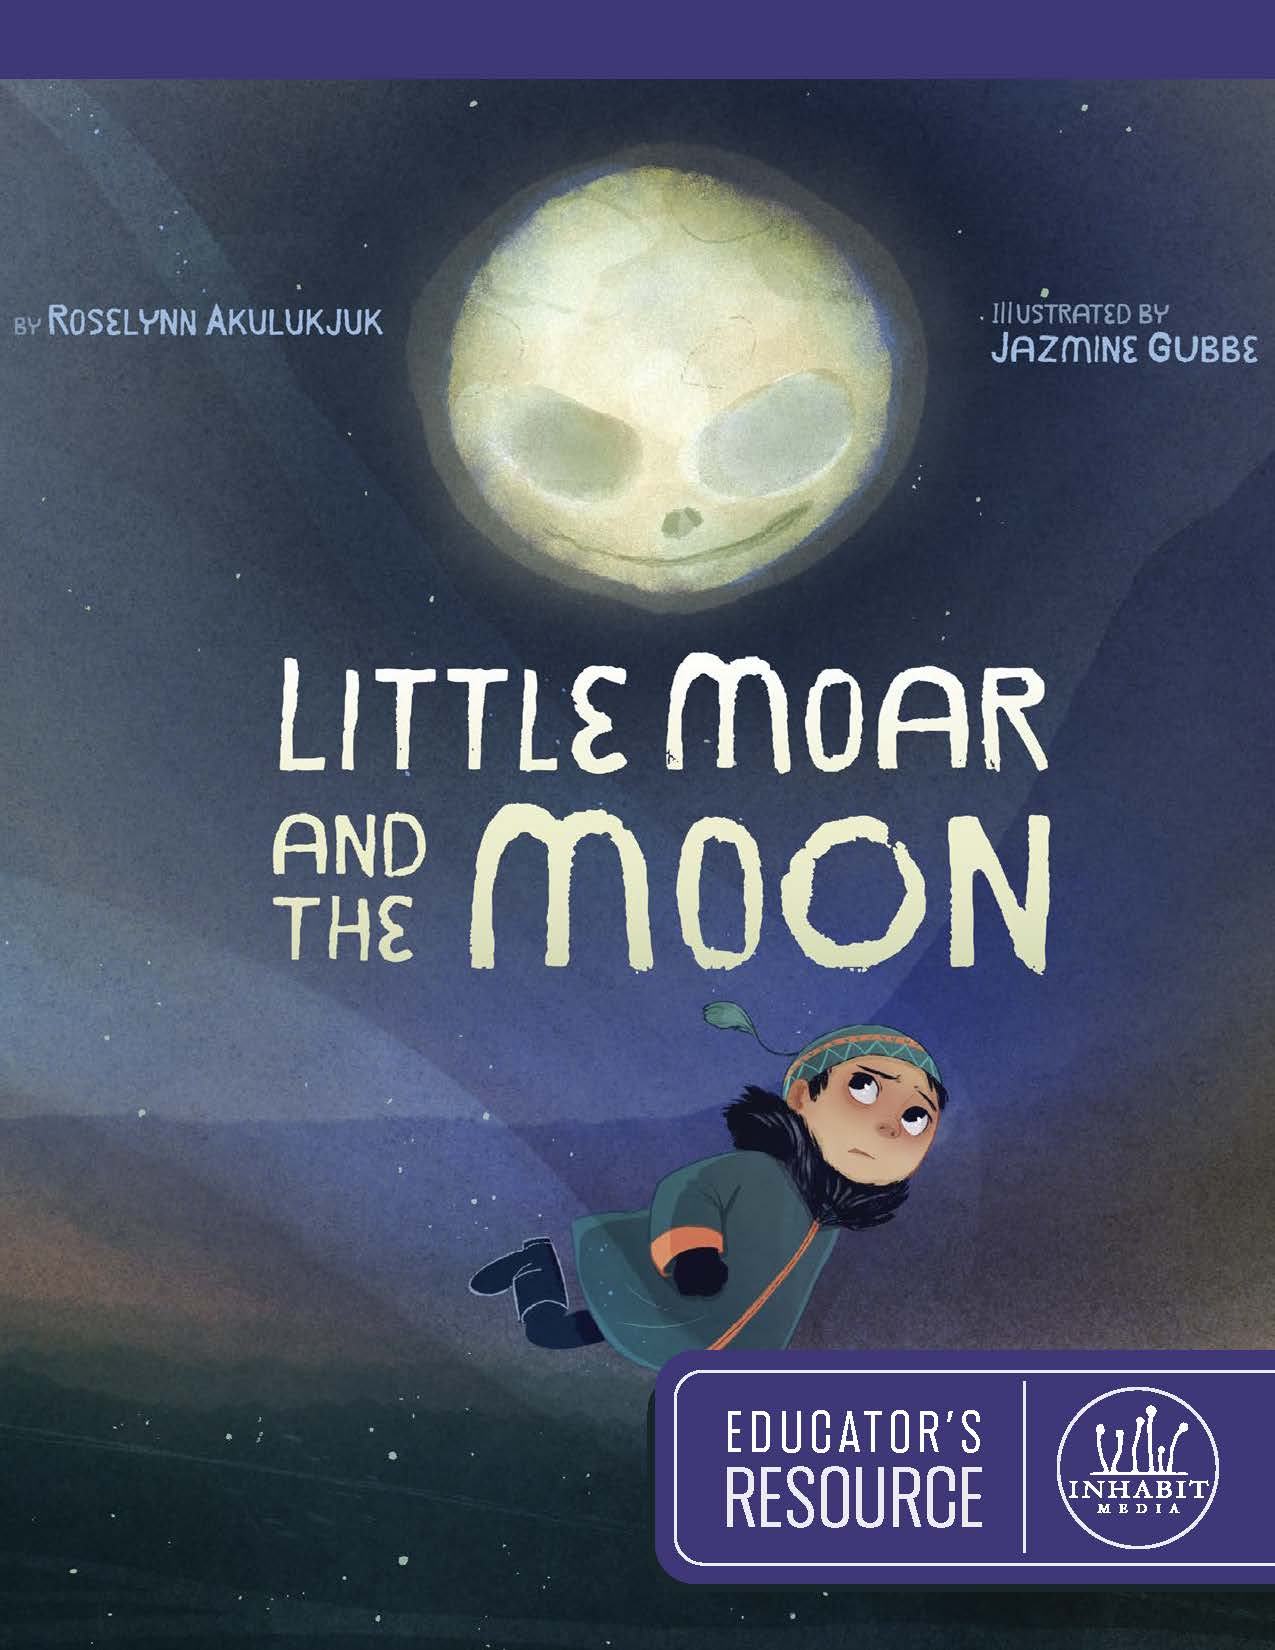 Little Moar and the Moon Educator's Resource